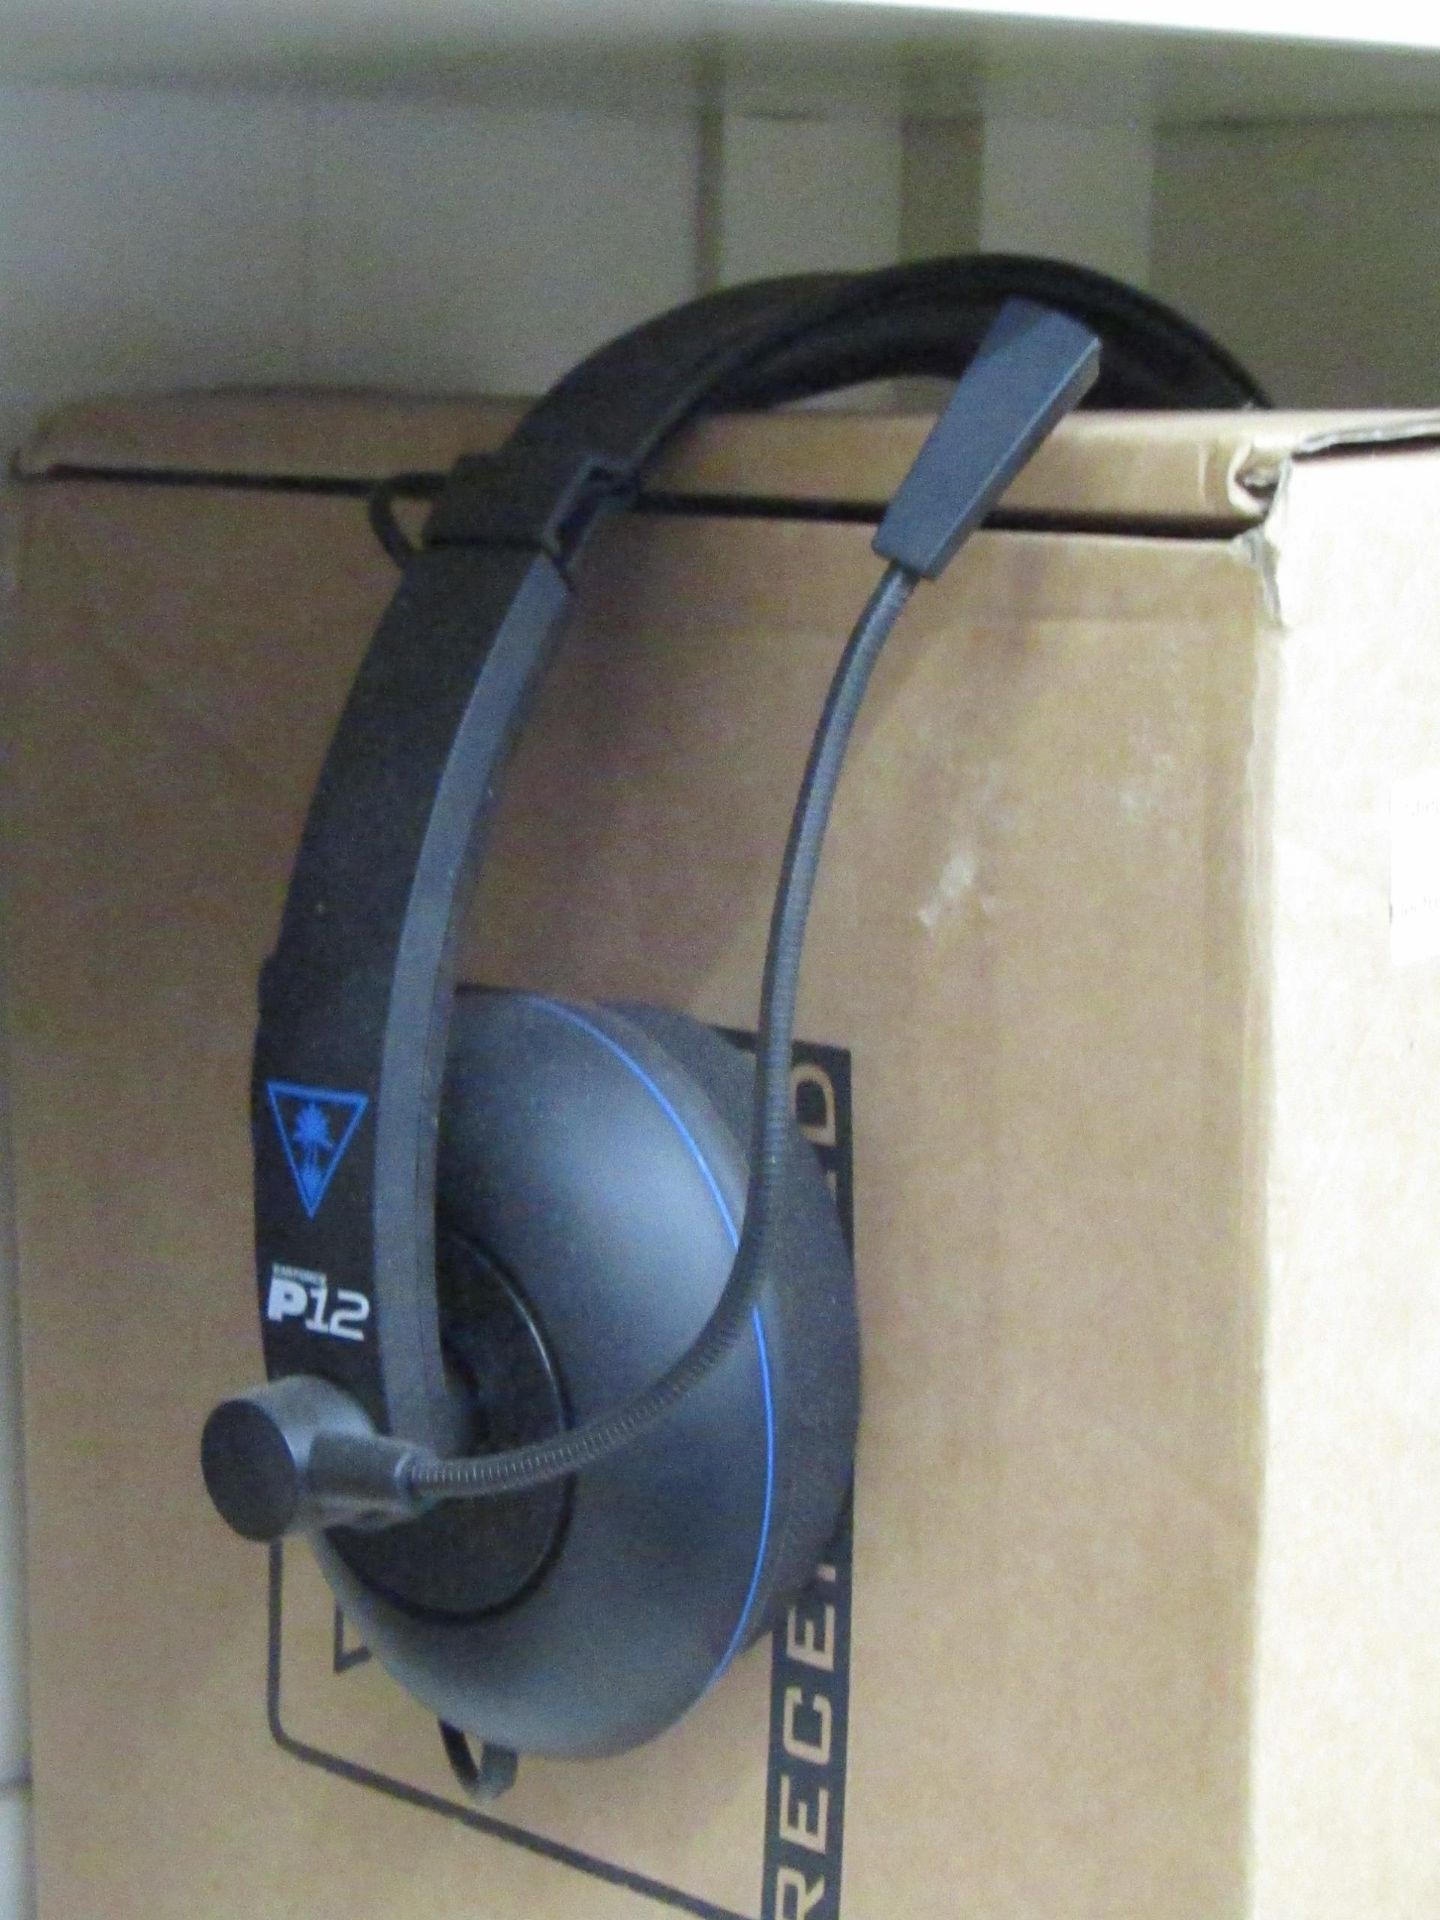 Turtle Beach P12 gaming headset, tested working and boxed.